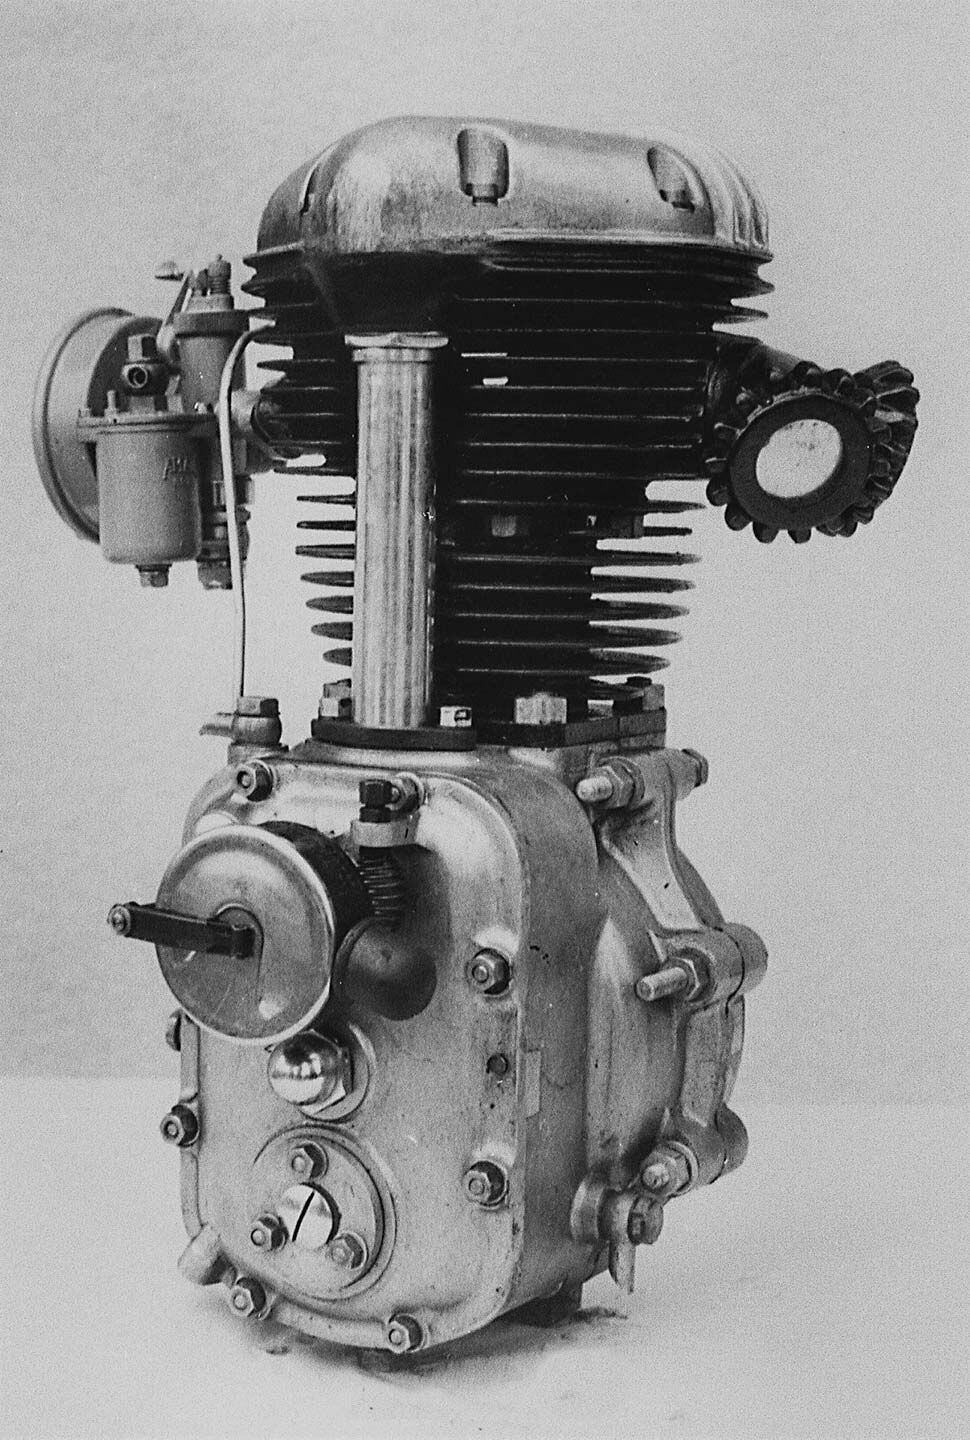 Kawasaki’s first foray into the motorcycle industry was in 1953 with the KE-1 engine, using concepts gleaned from the company’s aircraft operations.